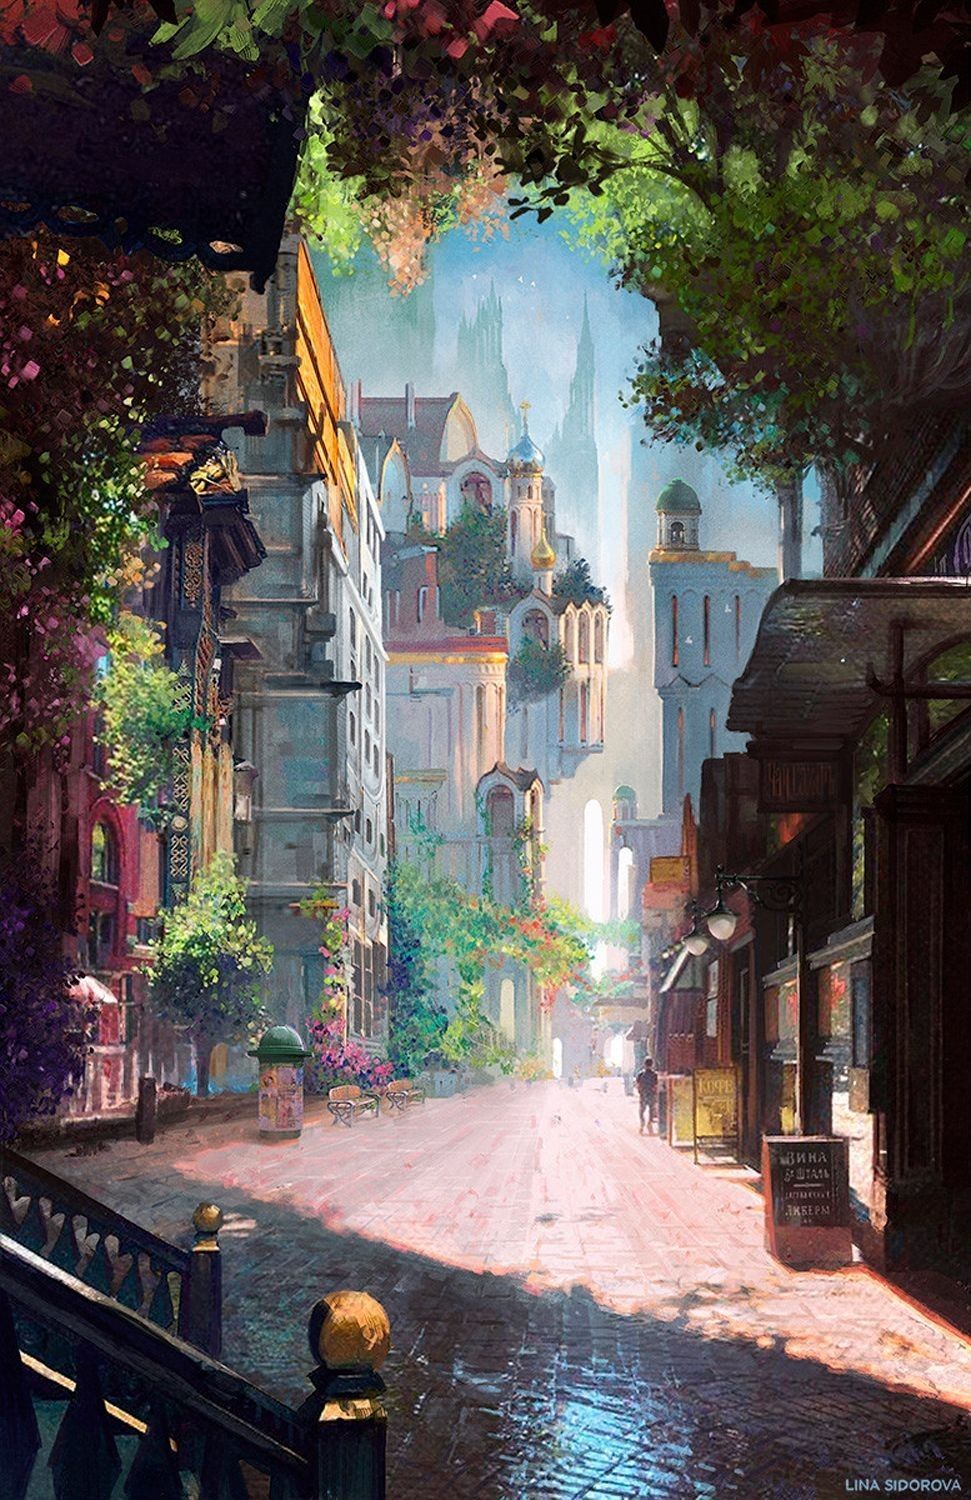 Anime Street Wallpapers - Wallpaper Cave